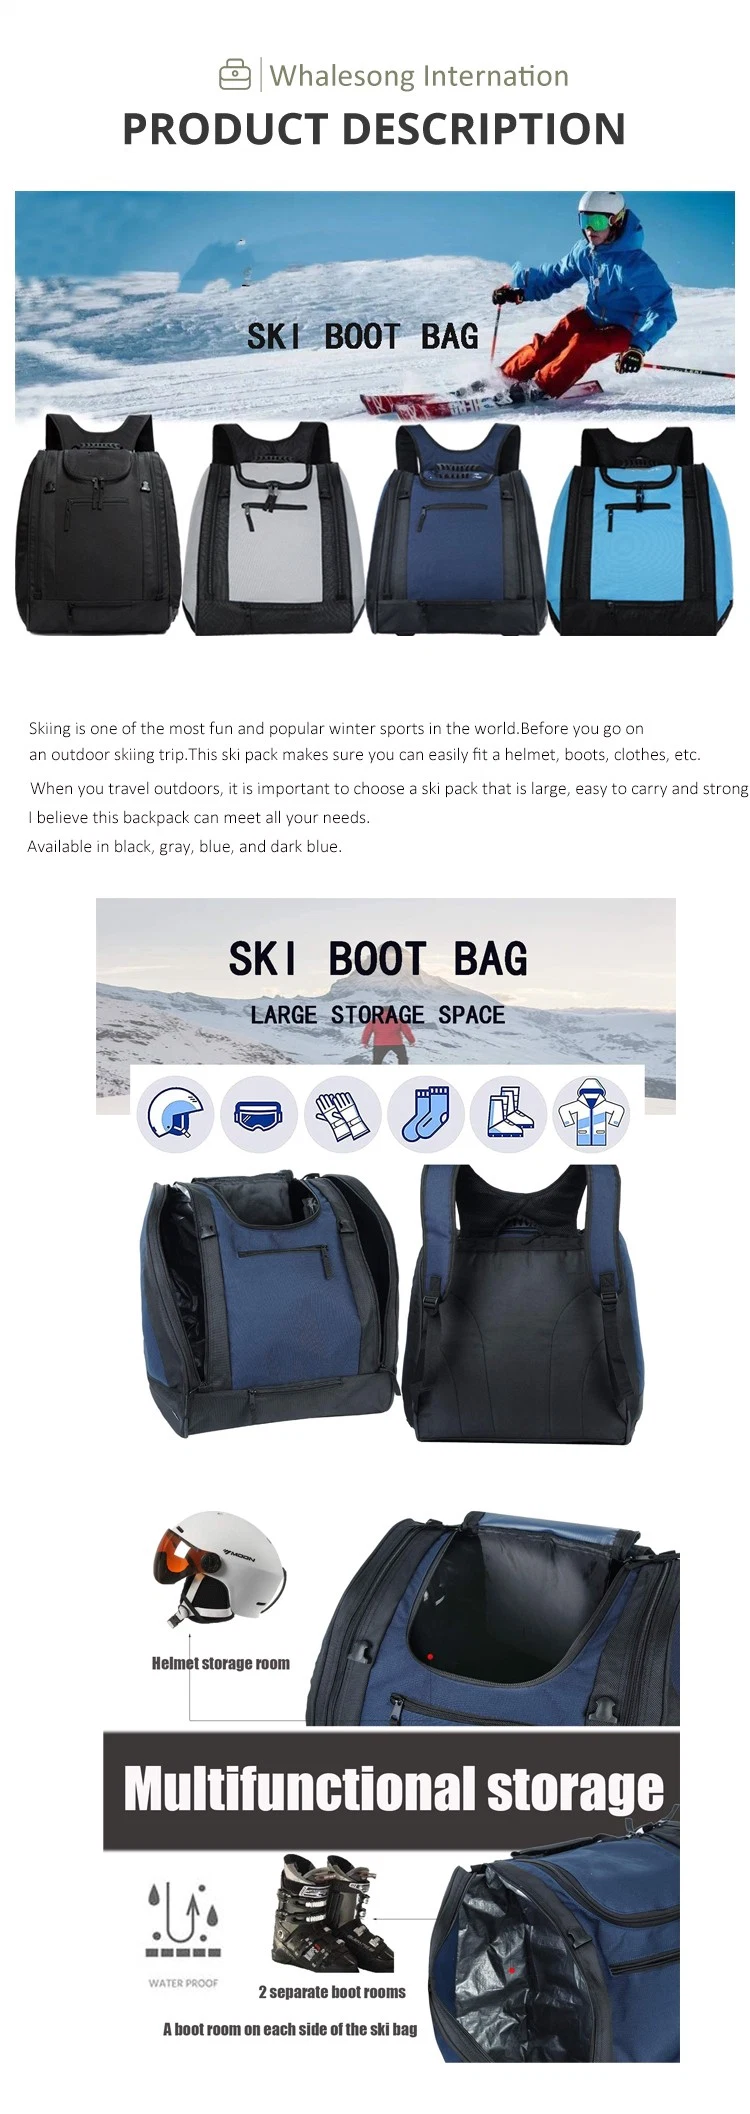 Snow Sports Multifunctional Large Capacity Backpack with Helmet Pocket